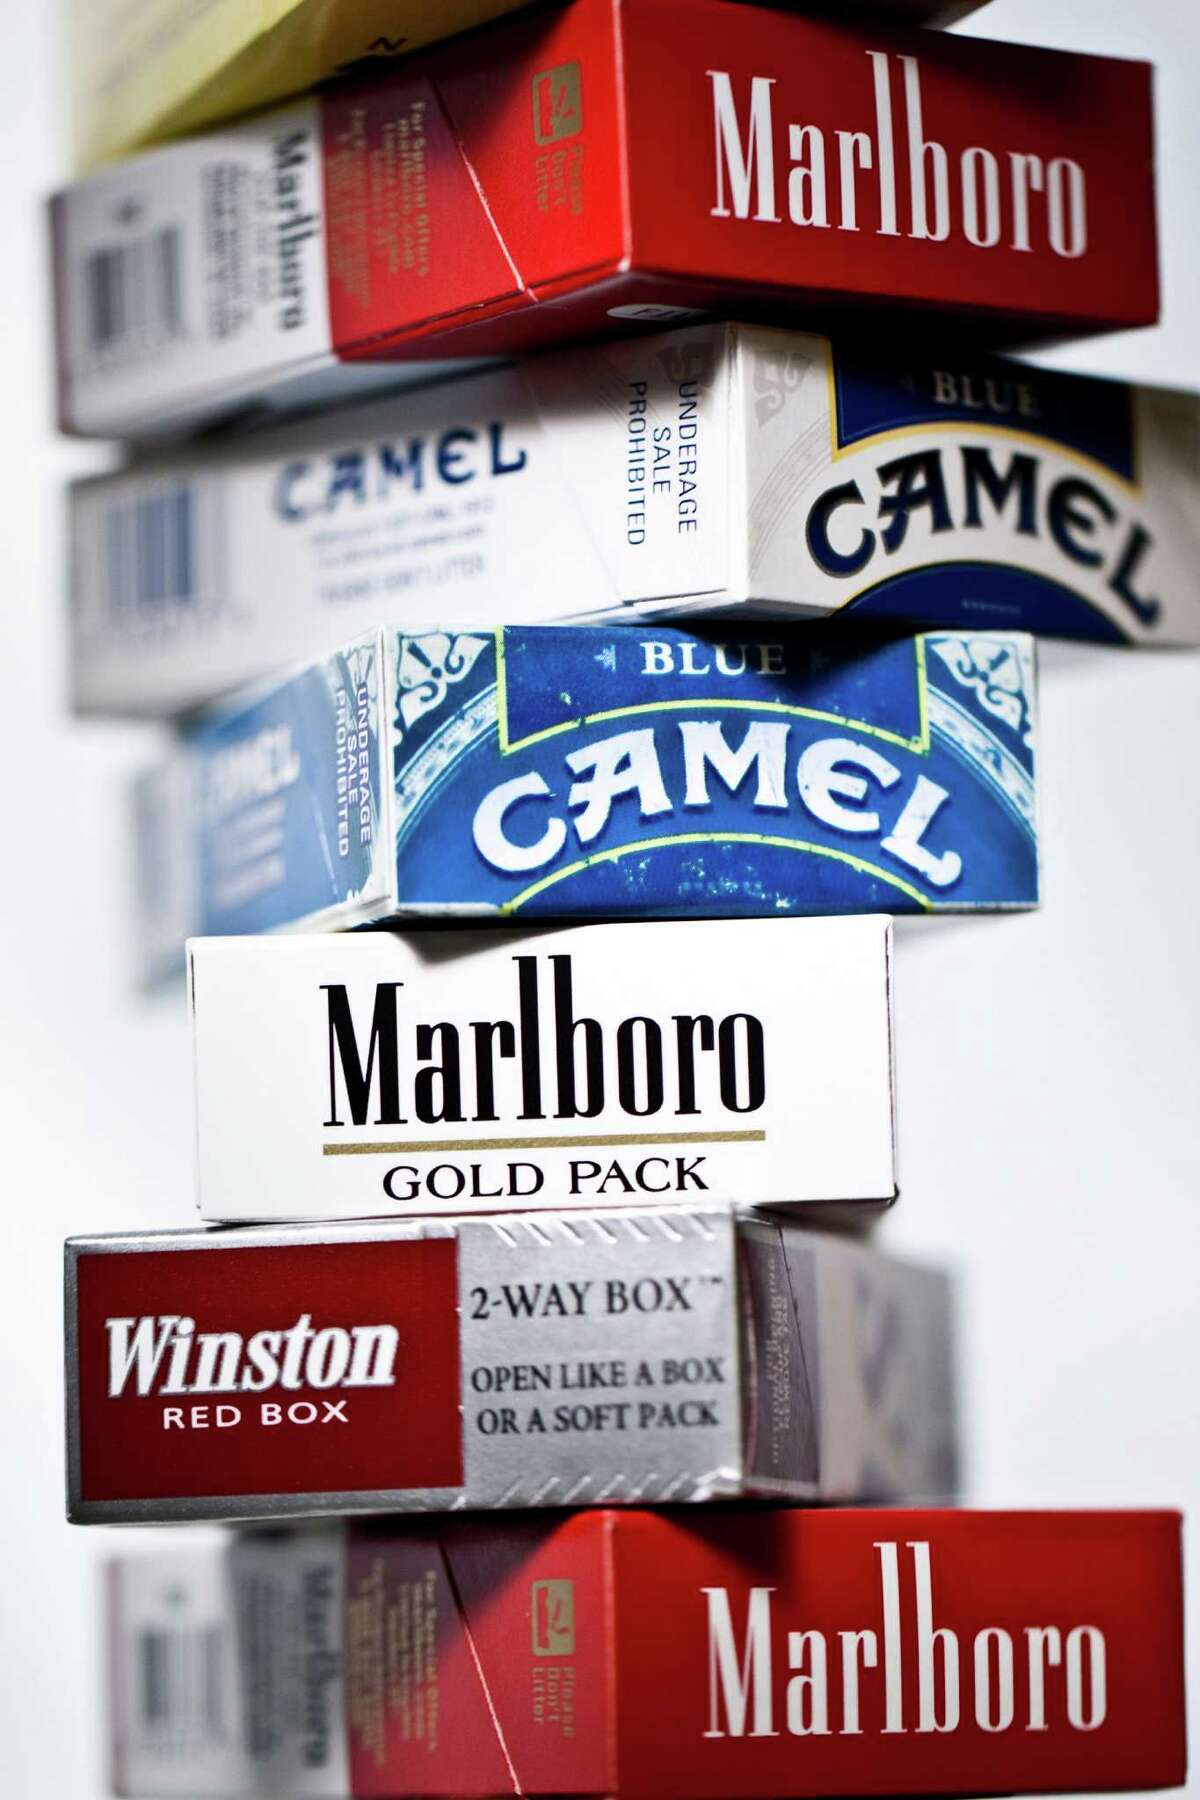 Various packs of cigarettes are arranged for a photograph in New York, U.S., on Thursday, April 14, 2011. Tobacco companies, including Altria Group Inc.'s Philip Morris USA unit, asked a judge last month to dismiss the federal government's 1999 racketeering case, saying court oversight of the industry is no longer needed. Photographer: Chris Goodney/Bloomberg